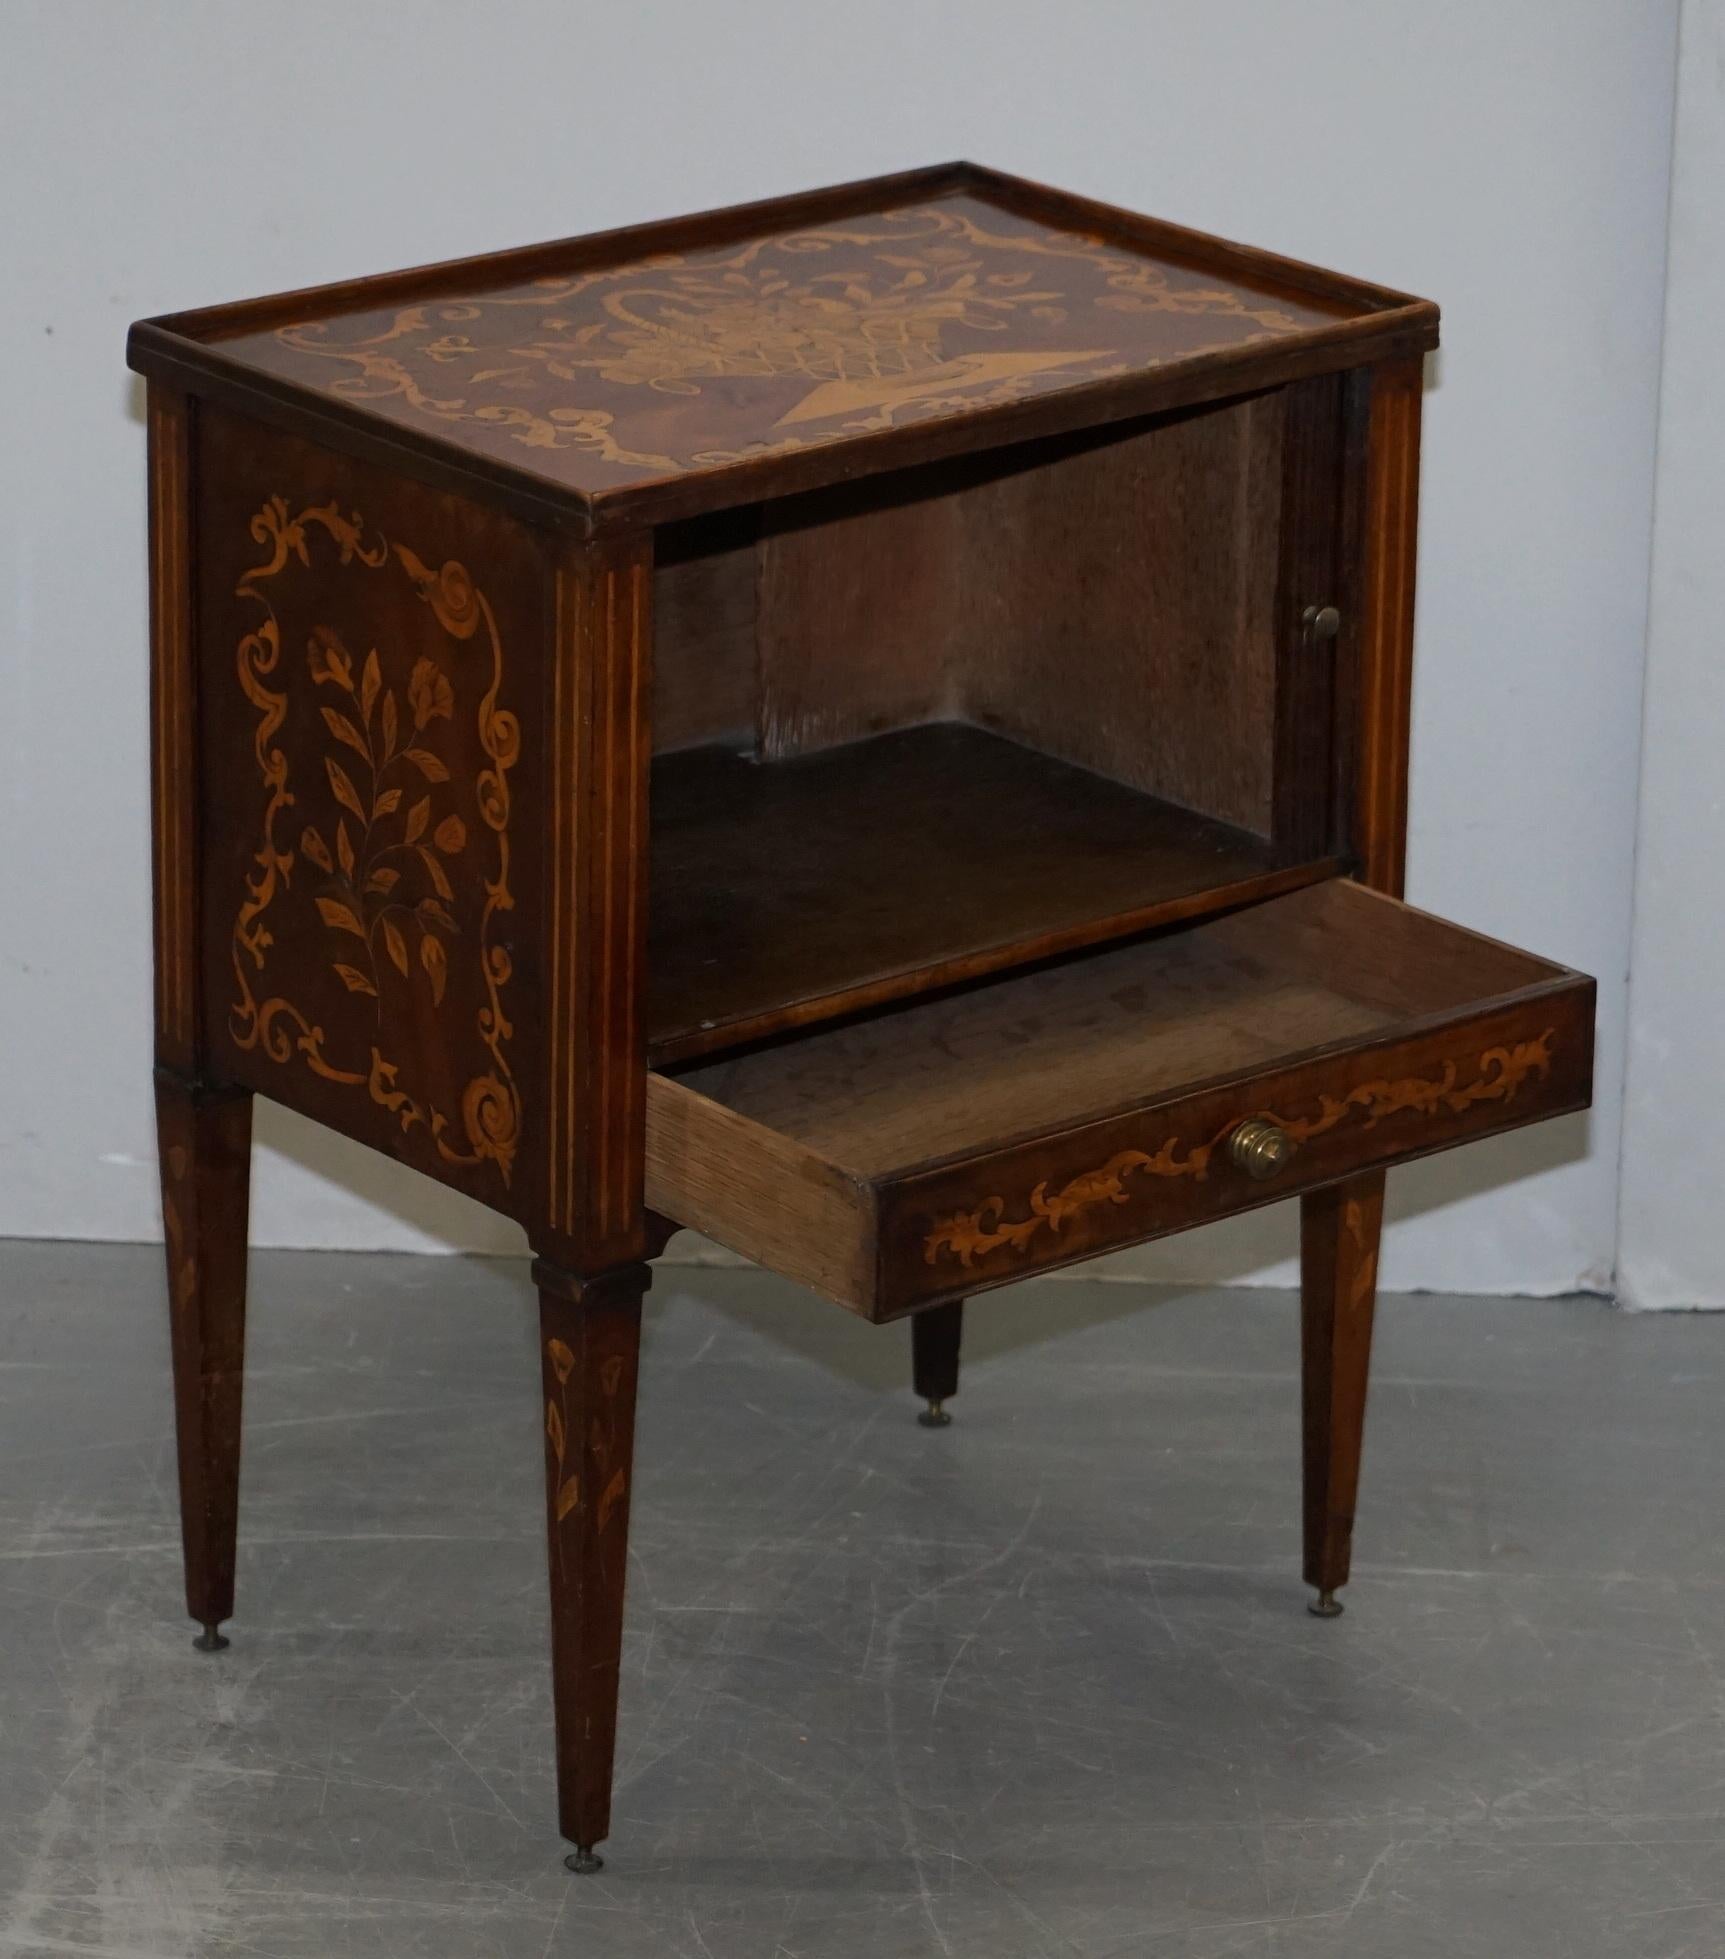 Lovely 19th Century Dutch Marquetry Inlaid Side Table with Tambour Fronted Door For Sale 4